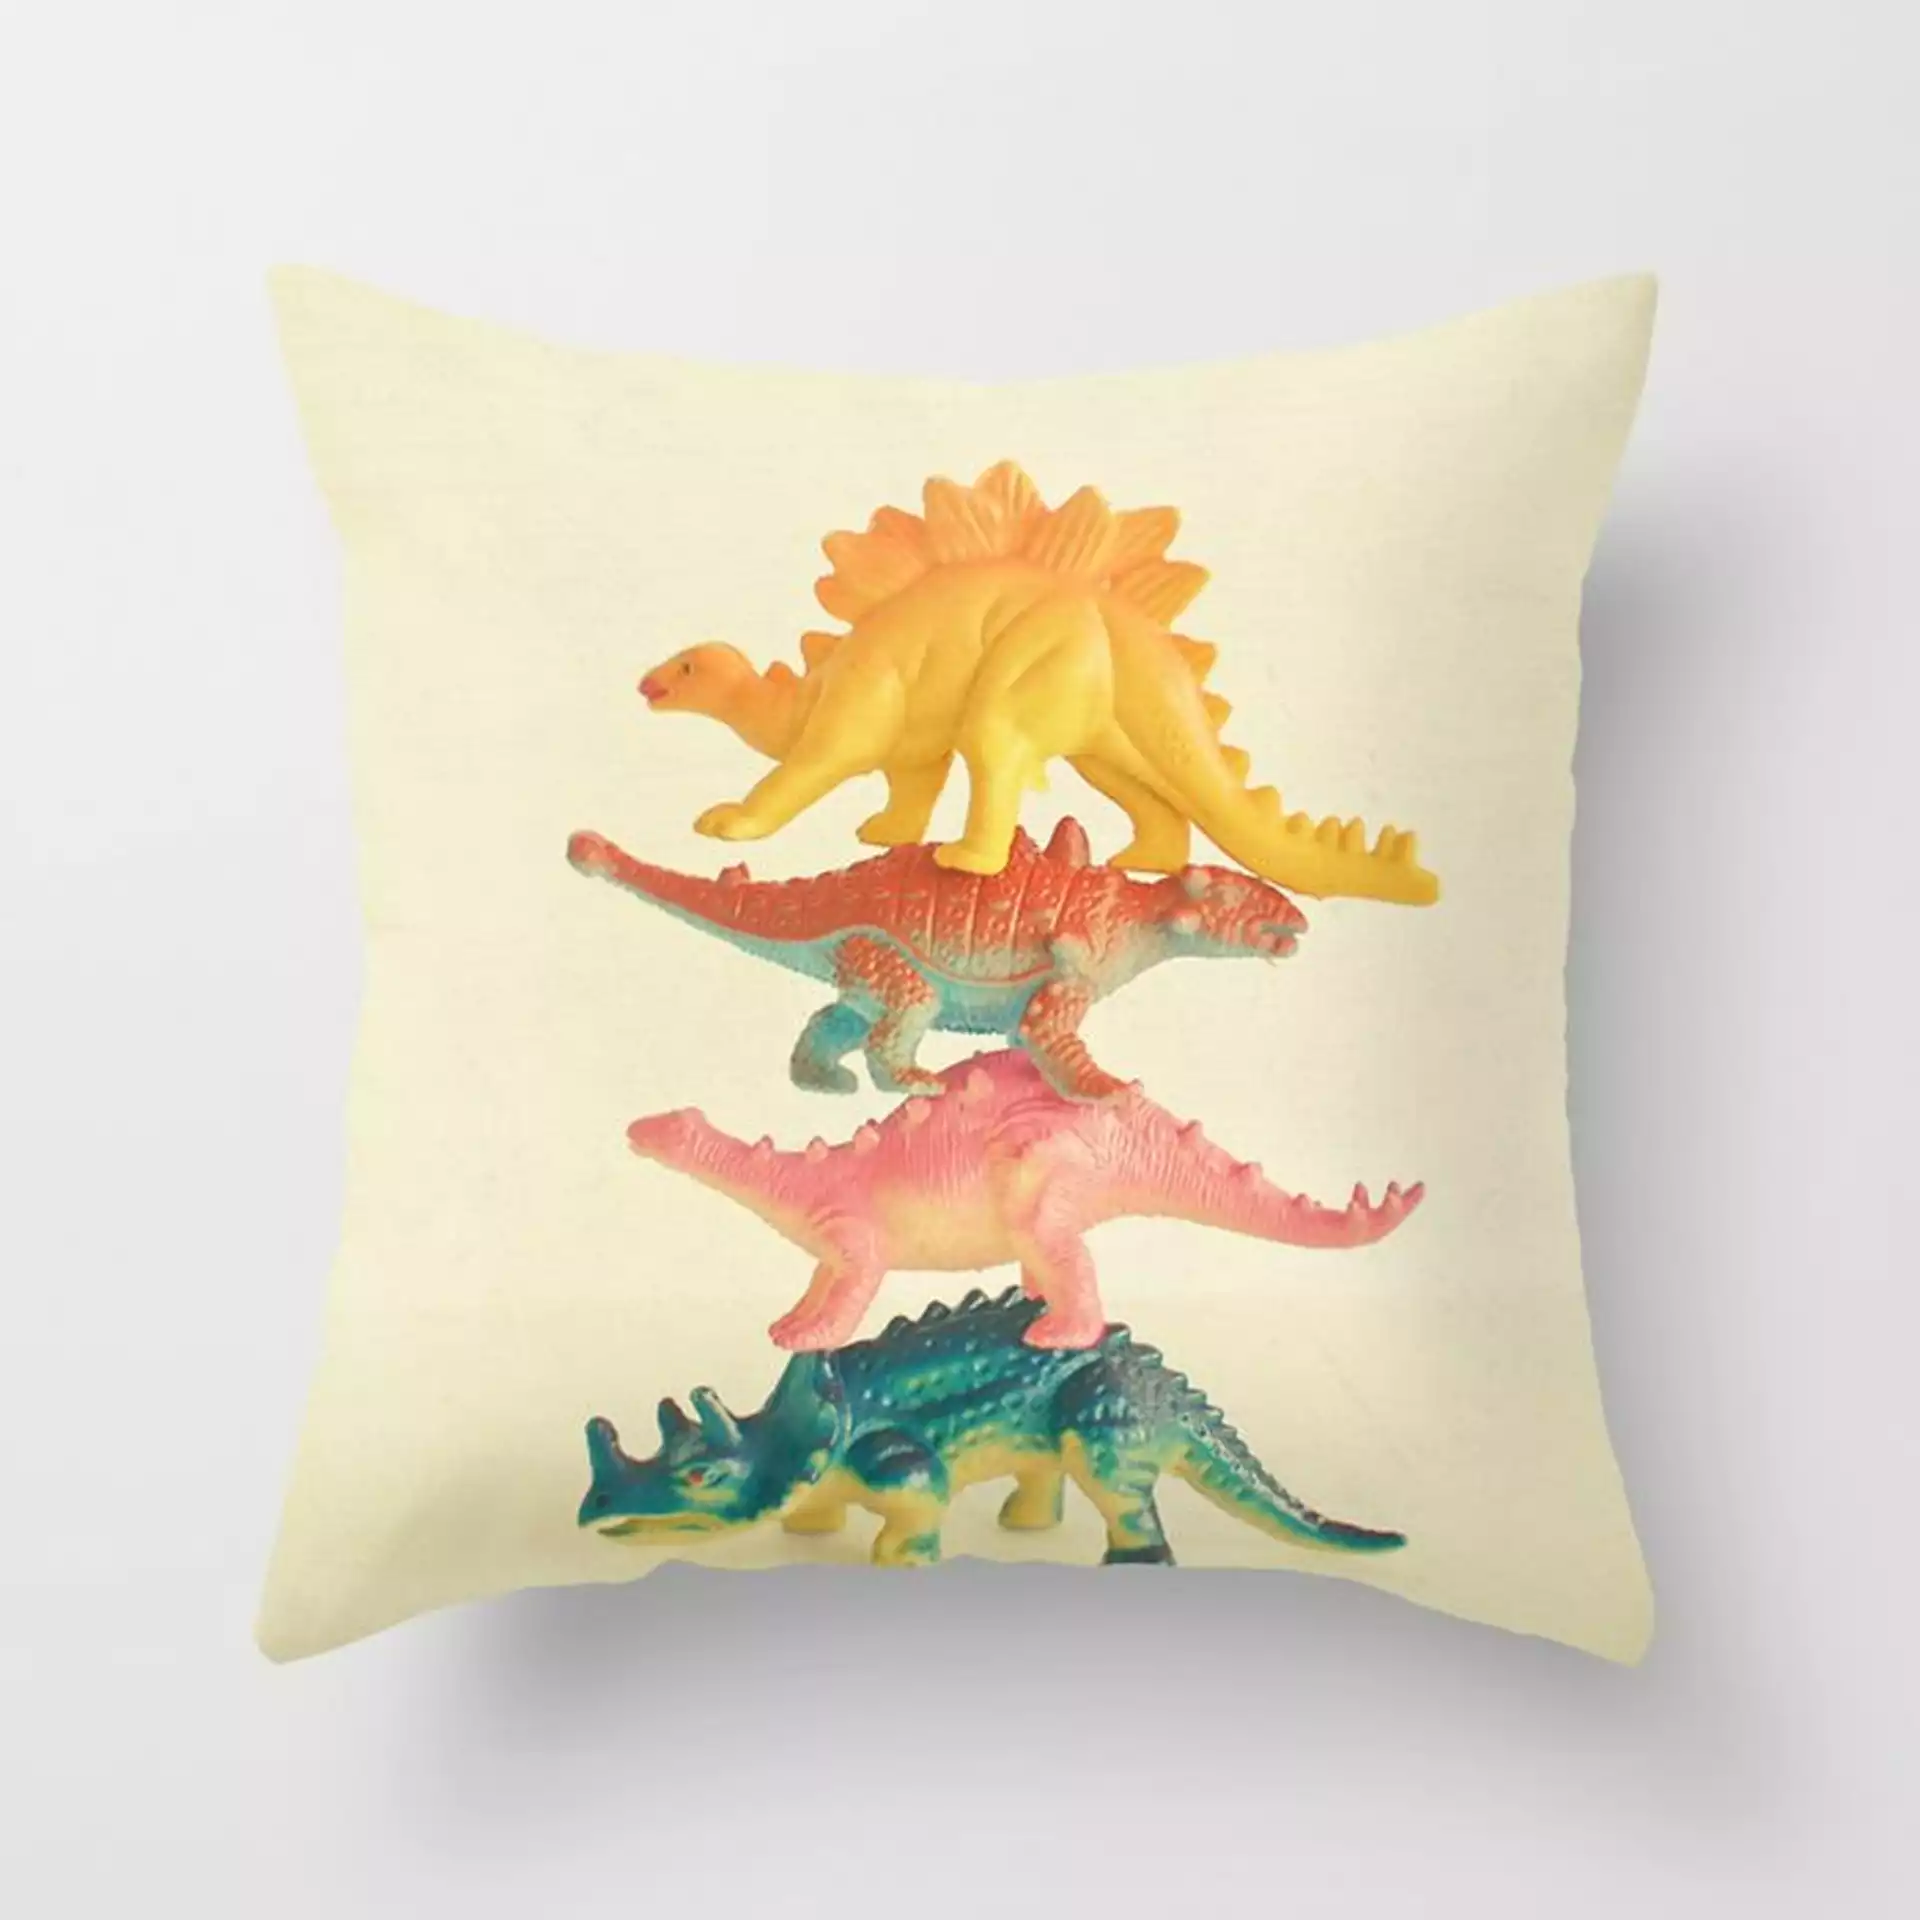 Dinosaur Antics Couch Throw Pillow by Cassia Beck - Cover (24" x 24") with pillow insert - Indoor Pillow